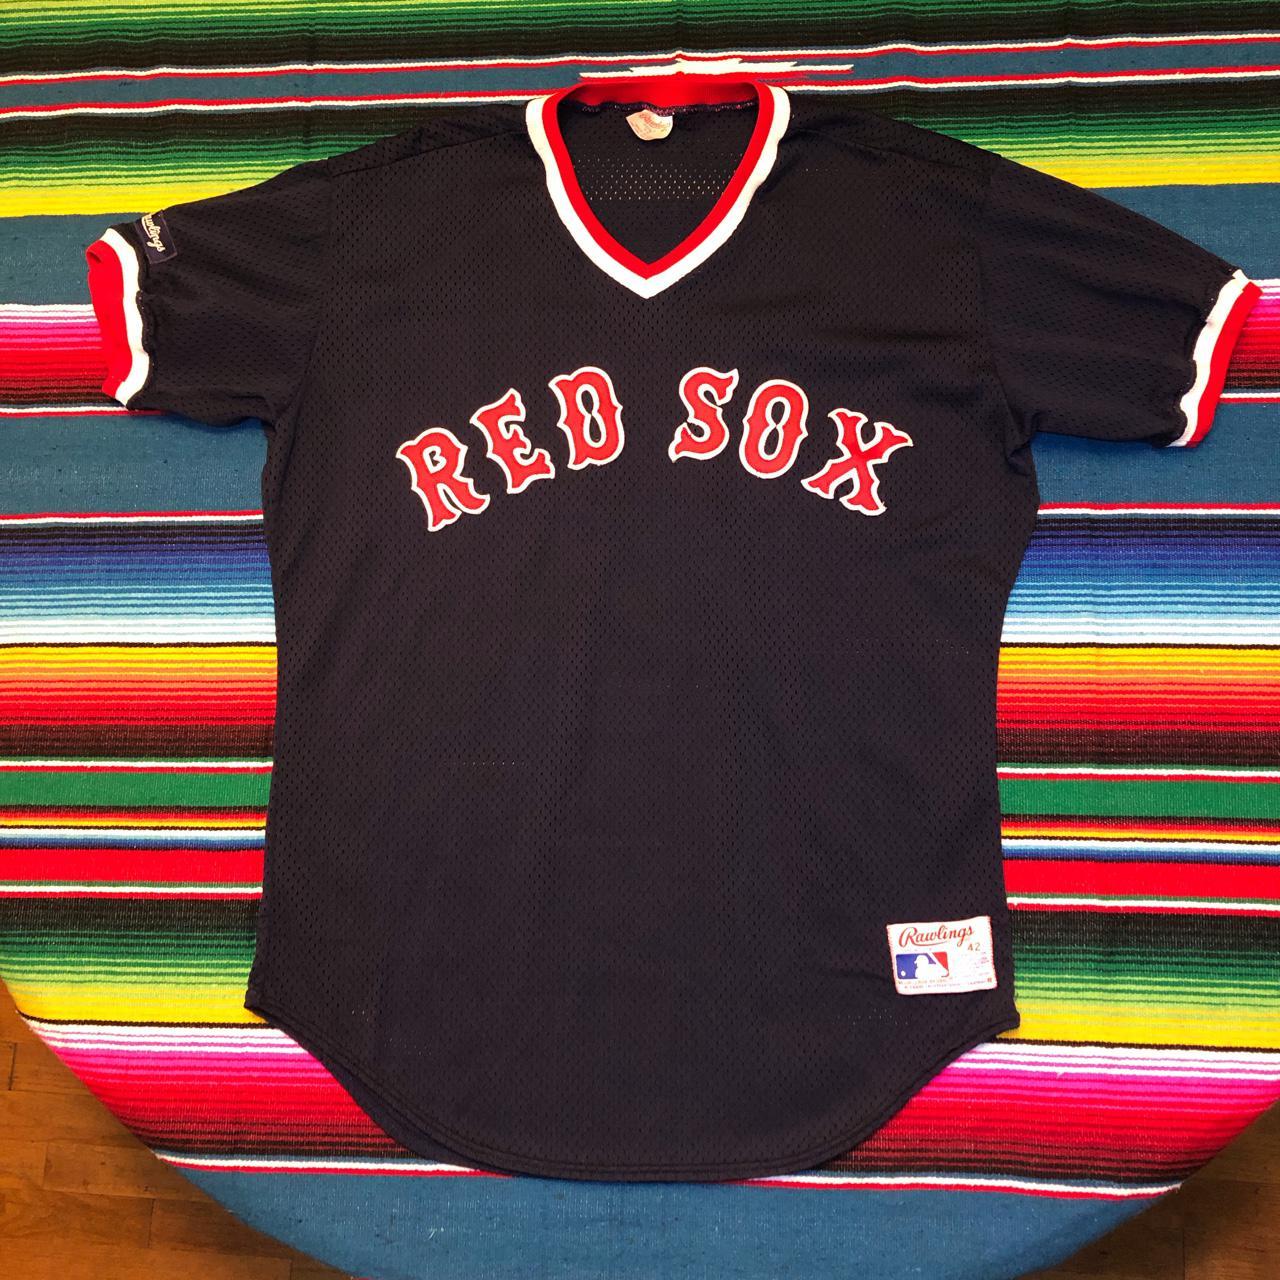 Red Sox Jersey Vintage 80s Red Sox Boston Red Sox Baseball 